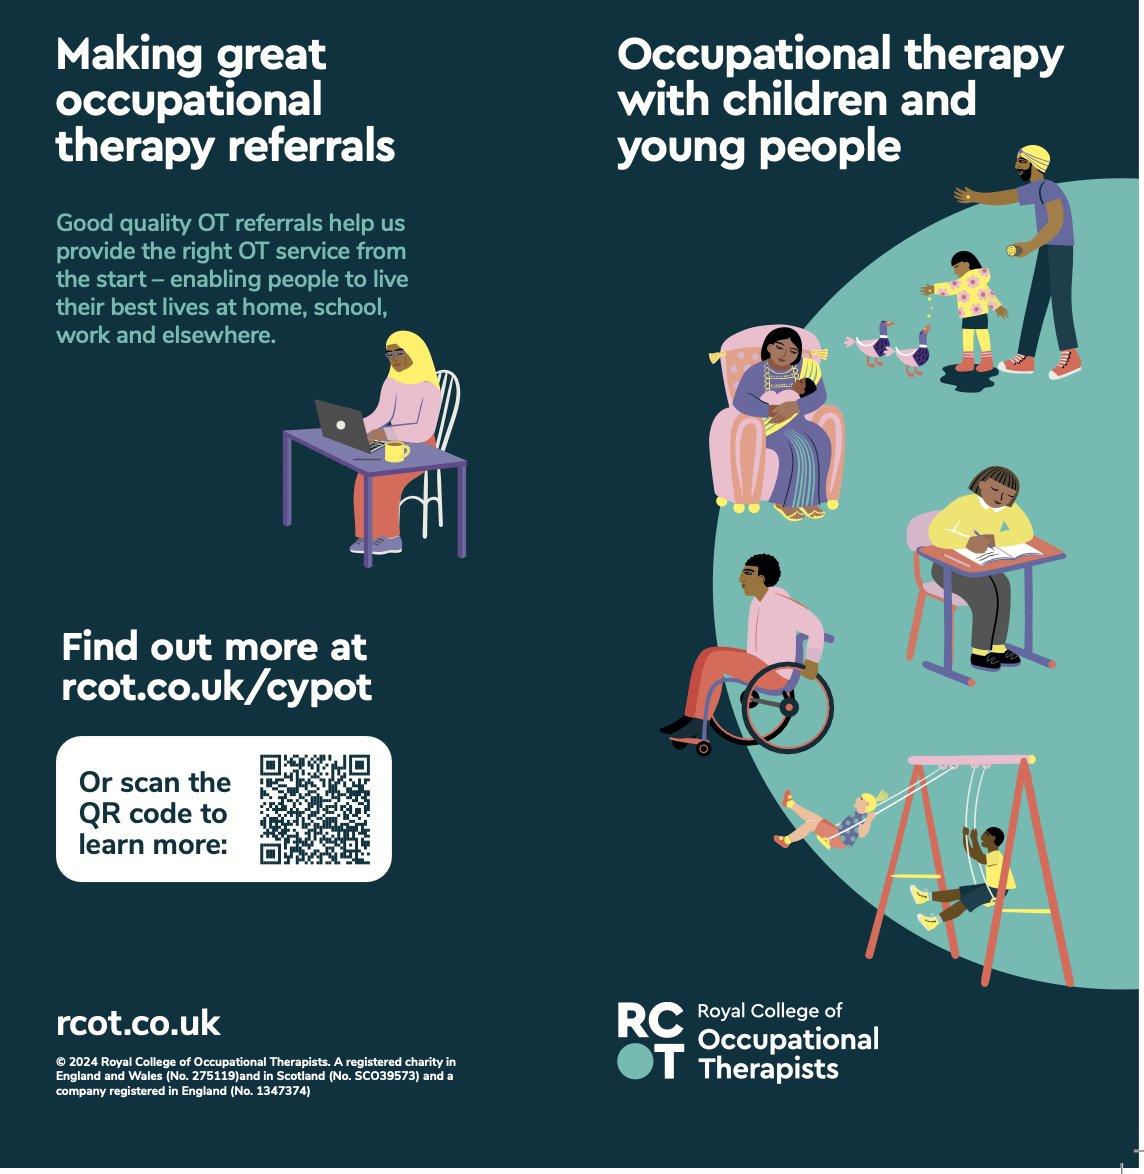 Spread the impact Occupational Therapy can have for Children and Young People! The latest @theRCOT leaflet showcases the invaluable role OT plays in enhancing daily occupations. Download now and share insights beyond the profession! #OccupationalTherapy rcot.co.uk/node/3652